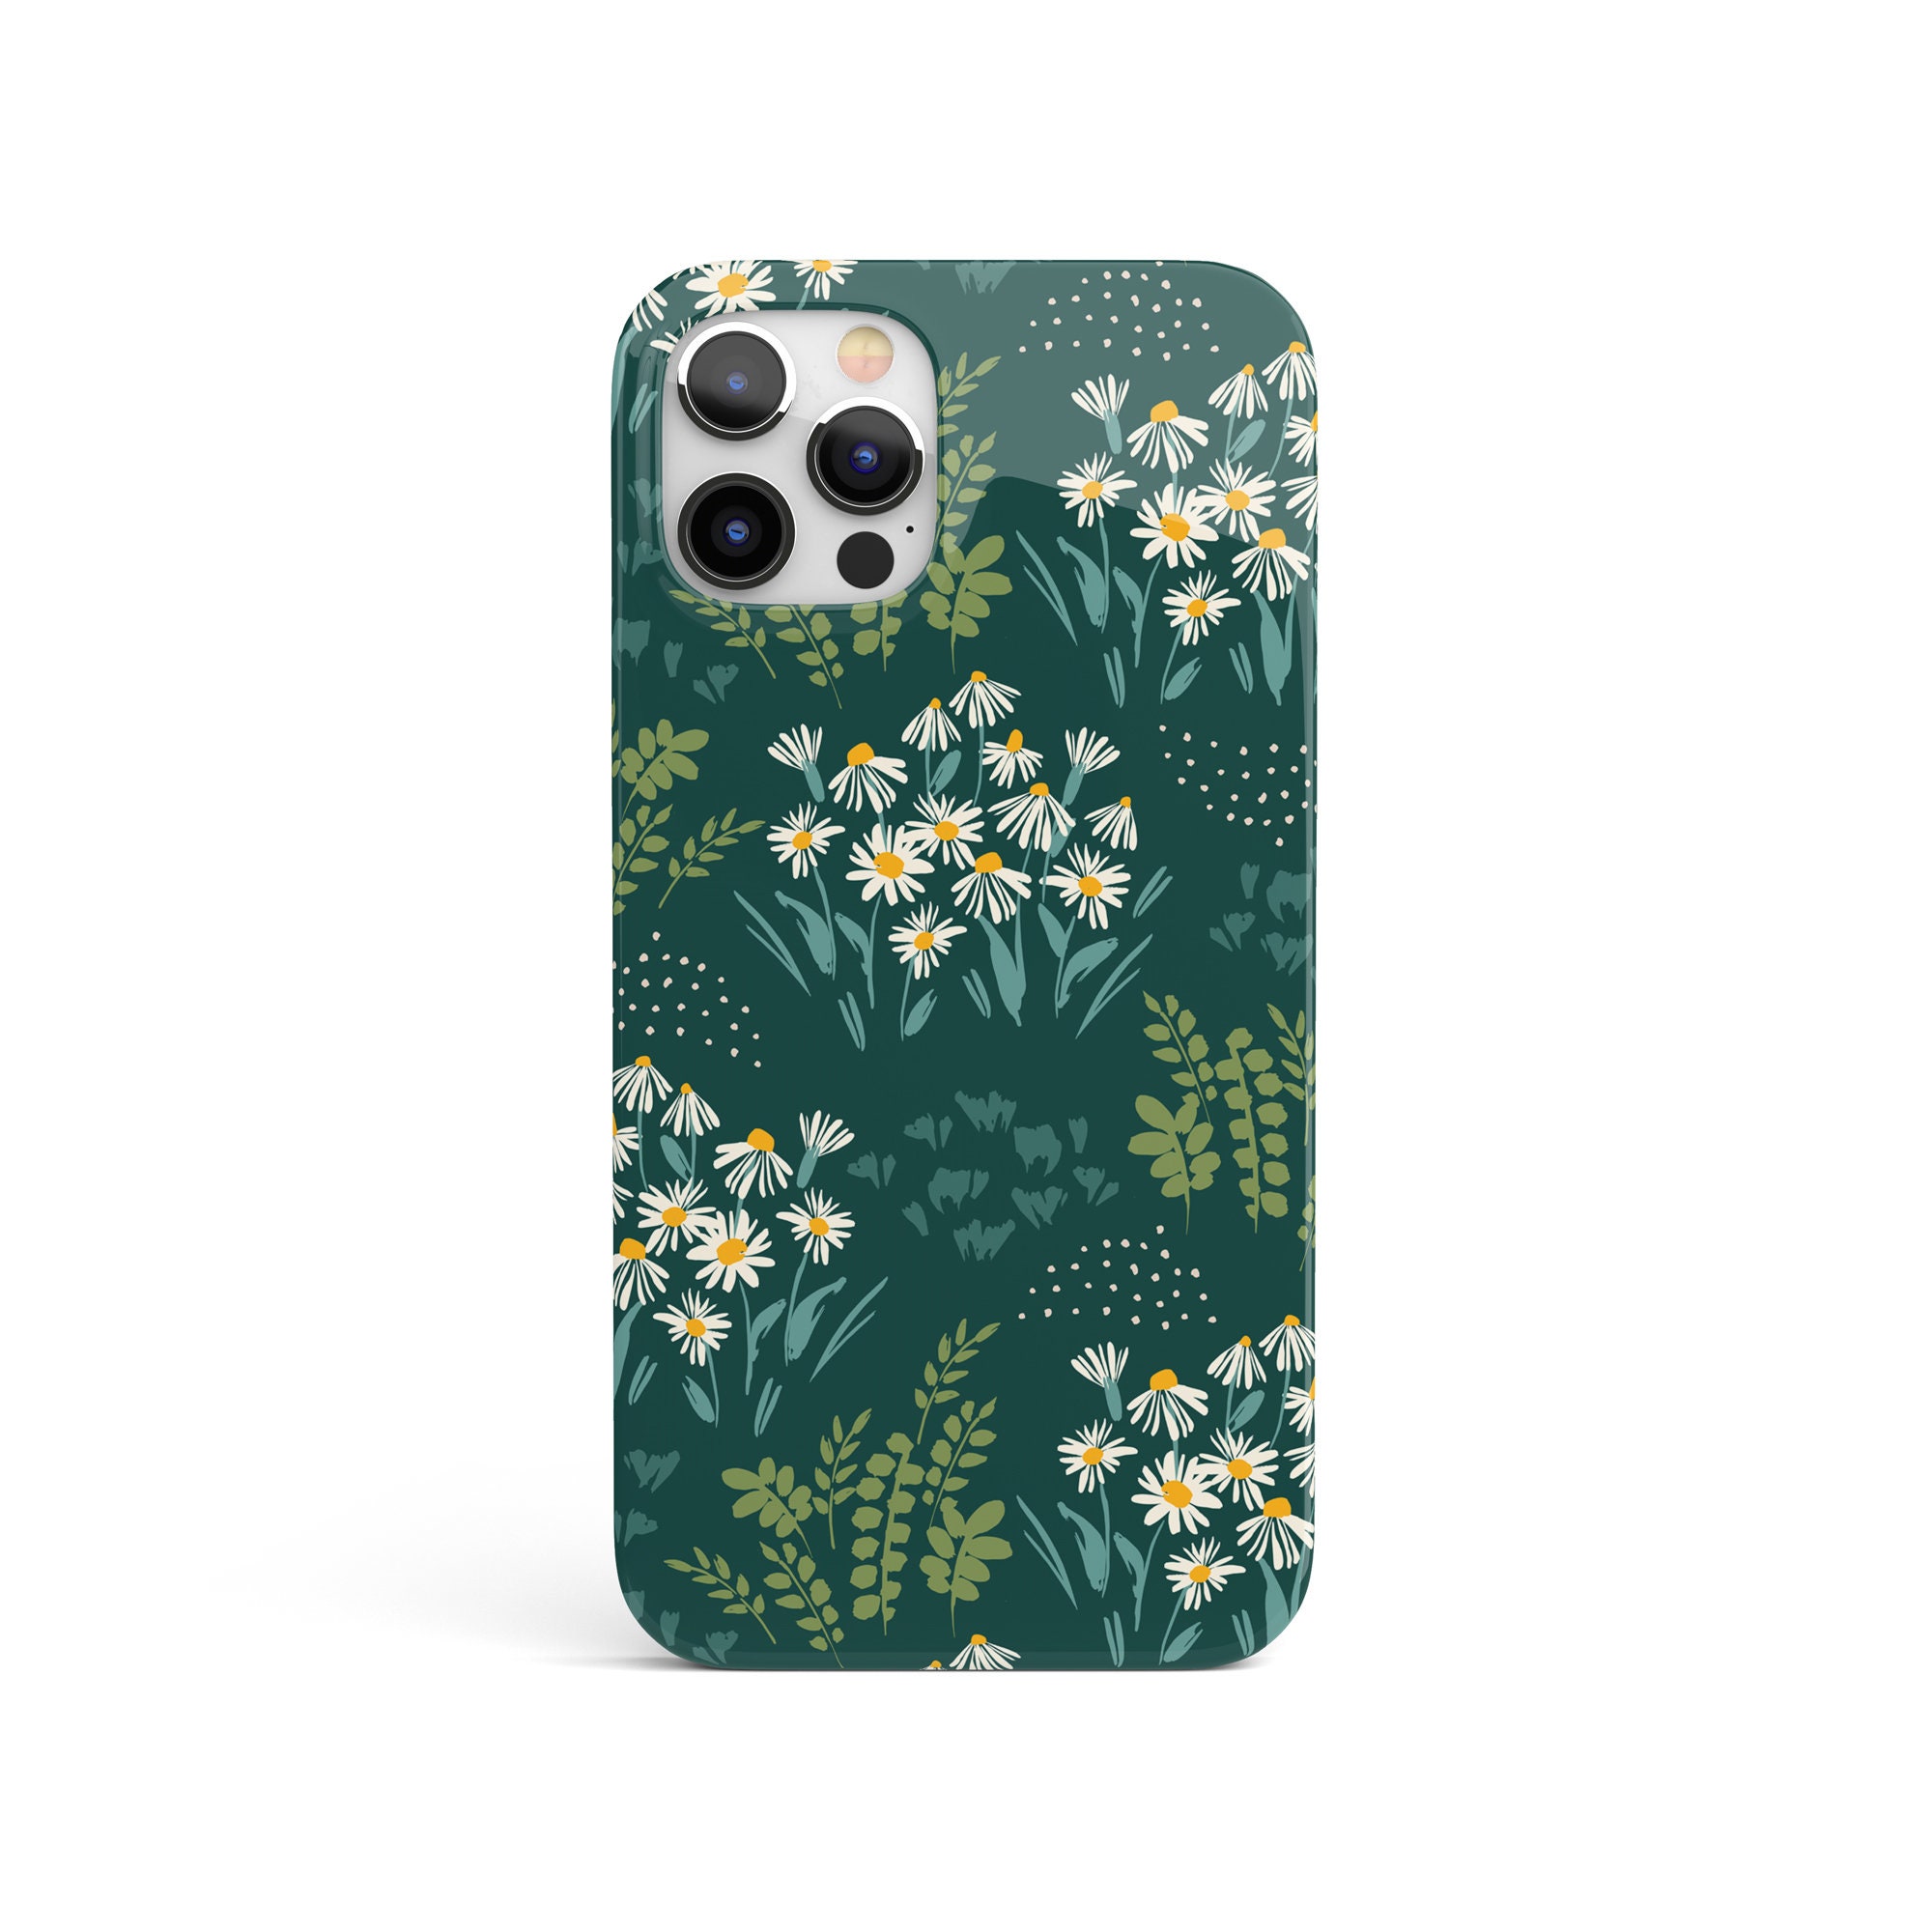 FULLYIDEA Back Cover for Samsung Galaxy M51, louis vuitton